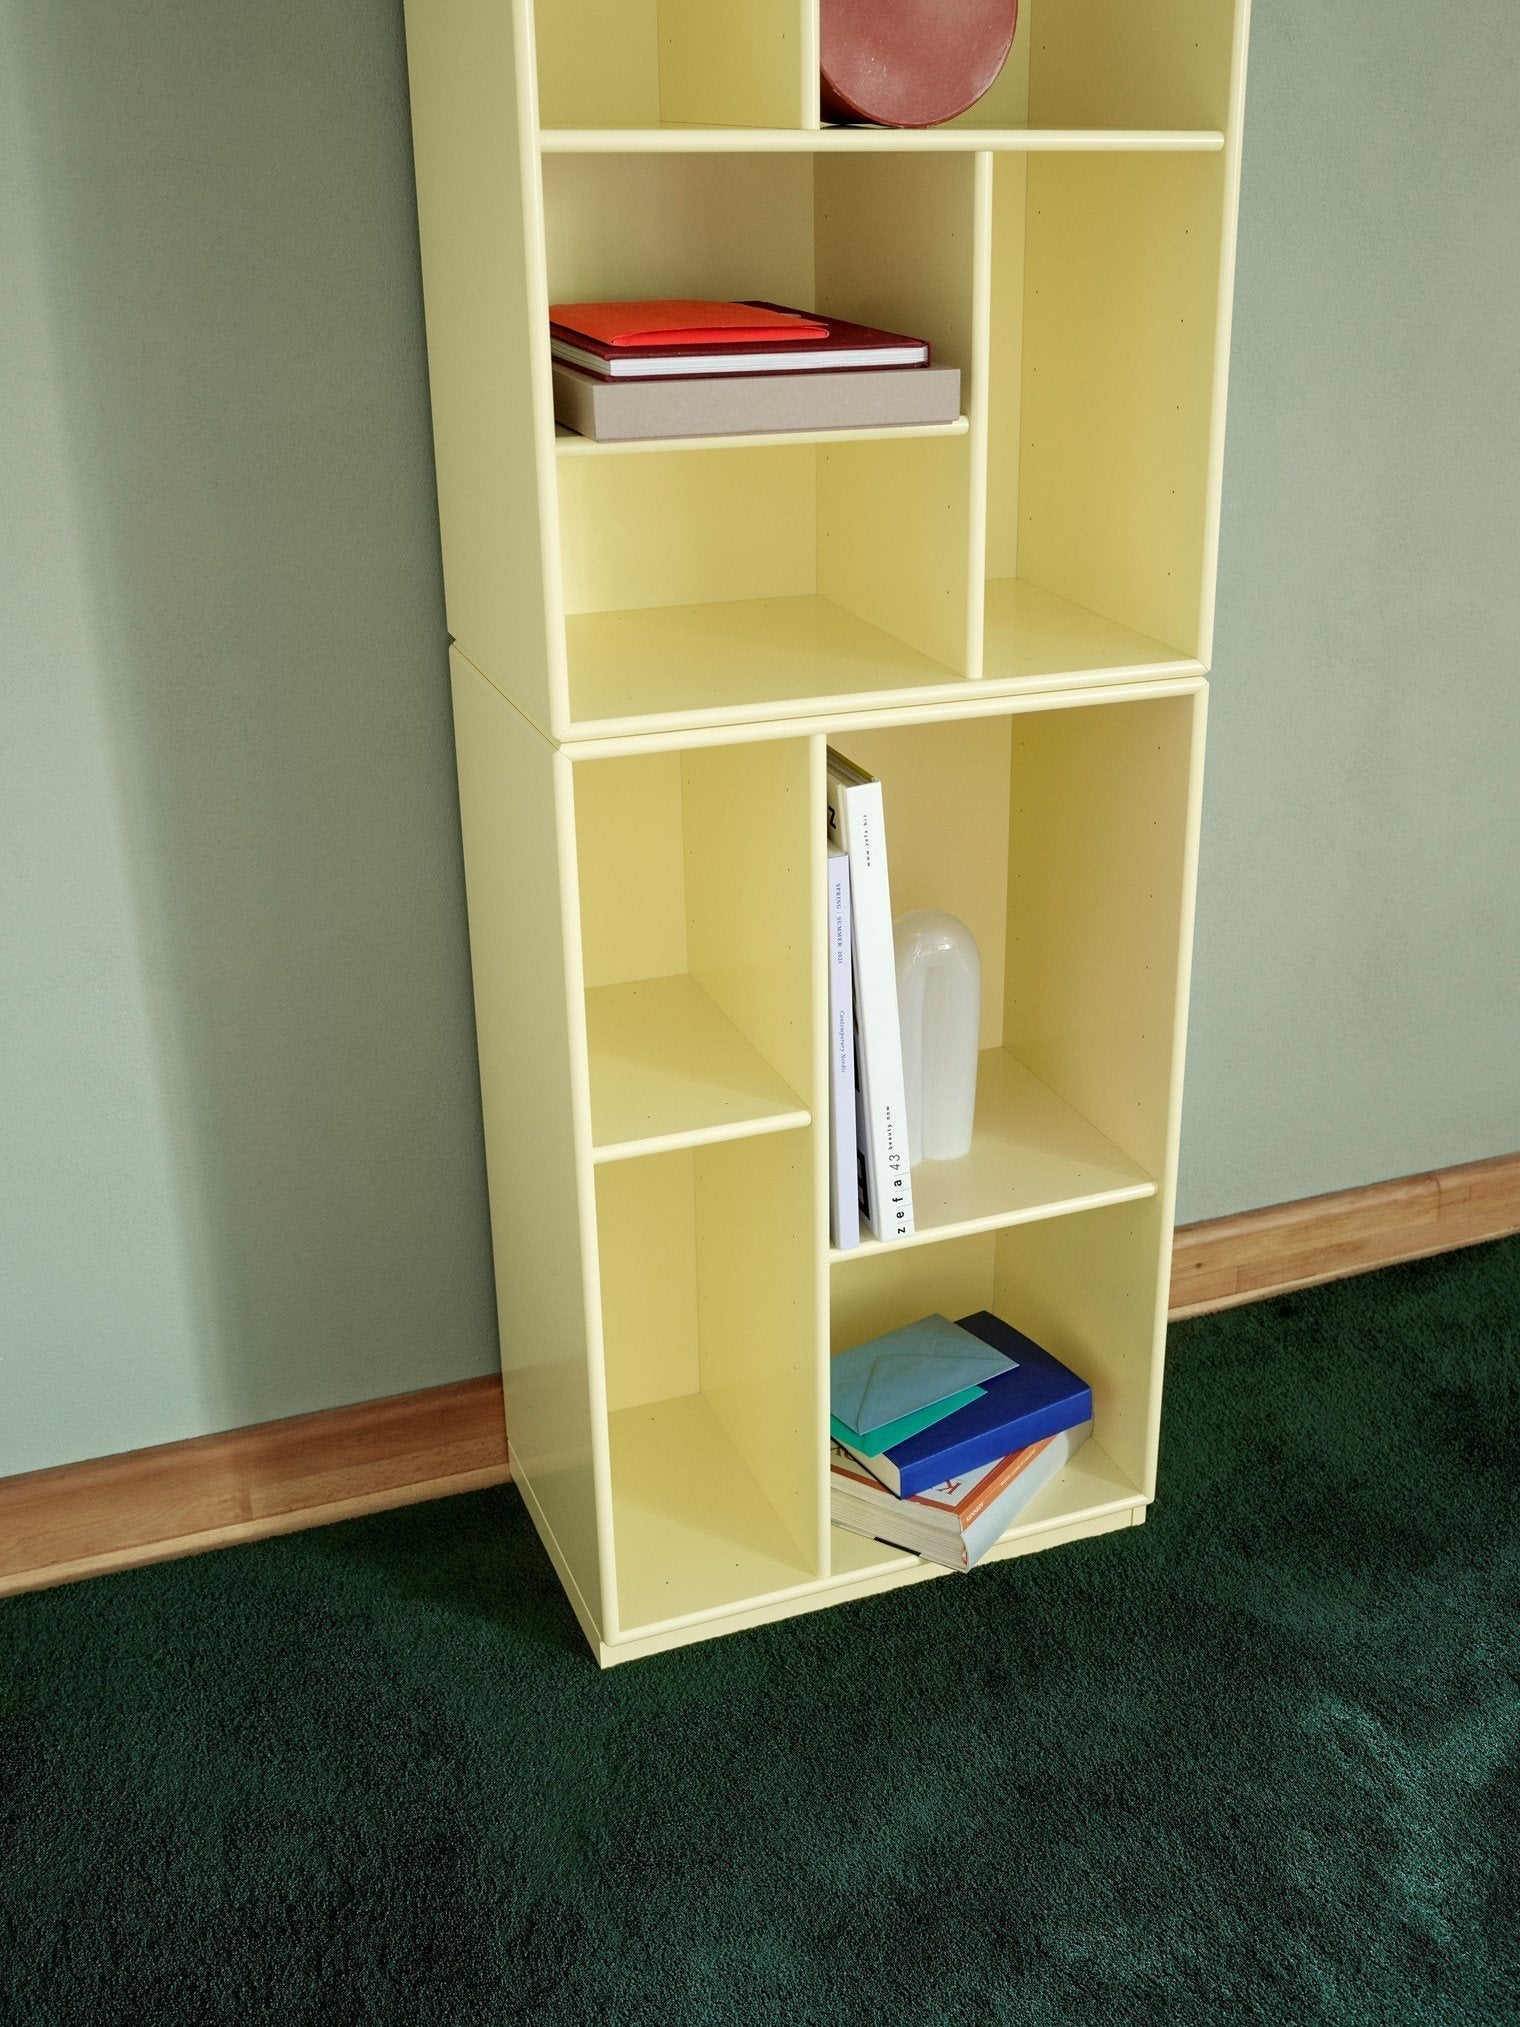 Montana Loom High Bookcase With Suspension Rail, Anthracite